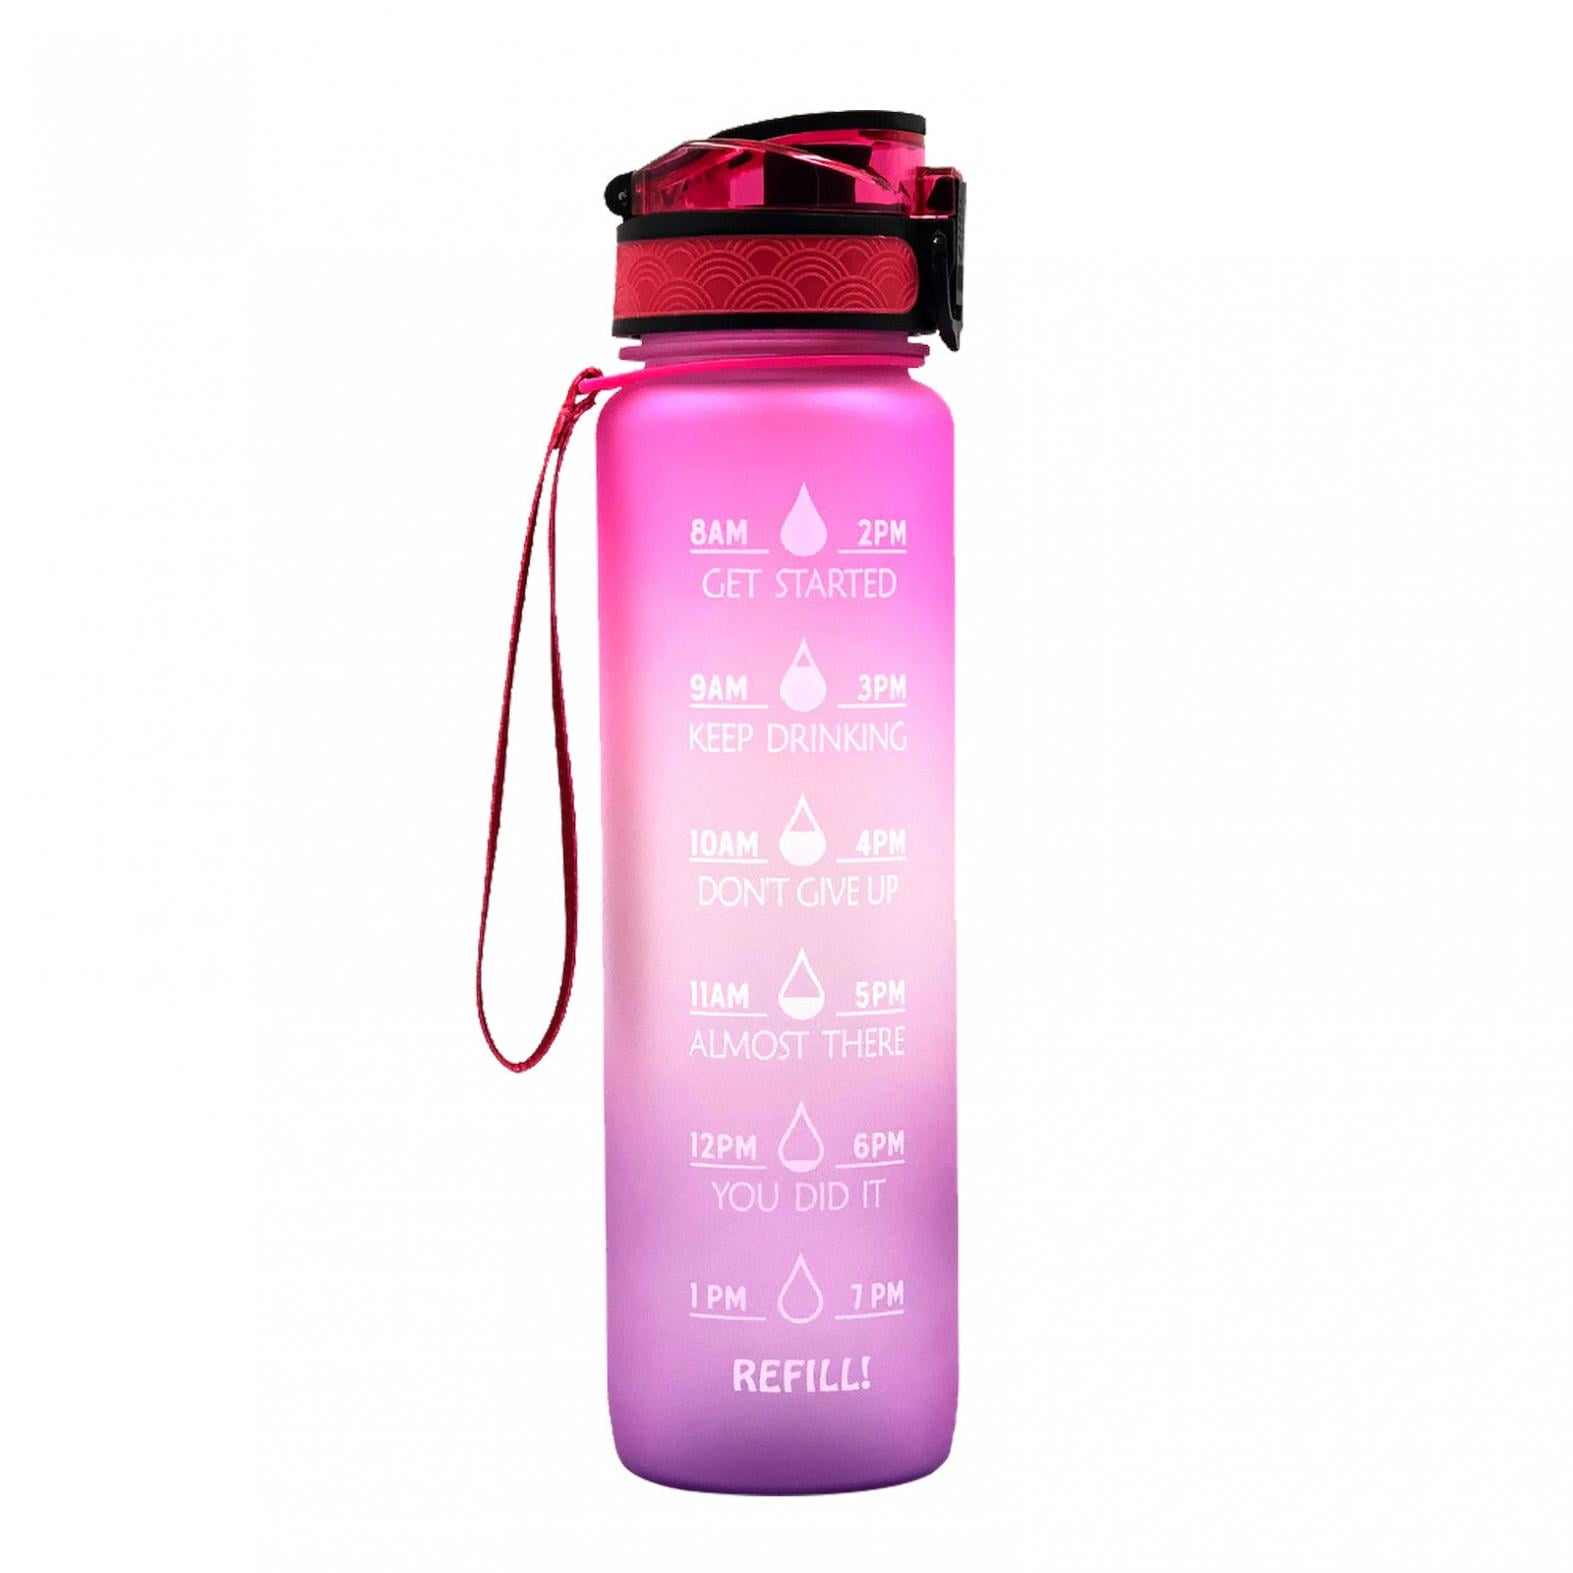 Healthywish - Water Bottle Time Marker, Daily Water Intake Bottle,  Pregnancy Water Bottle Tracker, W…See more Healthywish - Water Bottle Time  Marker